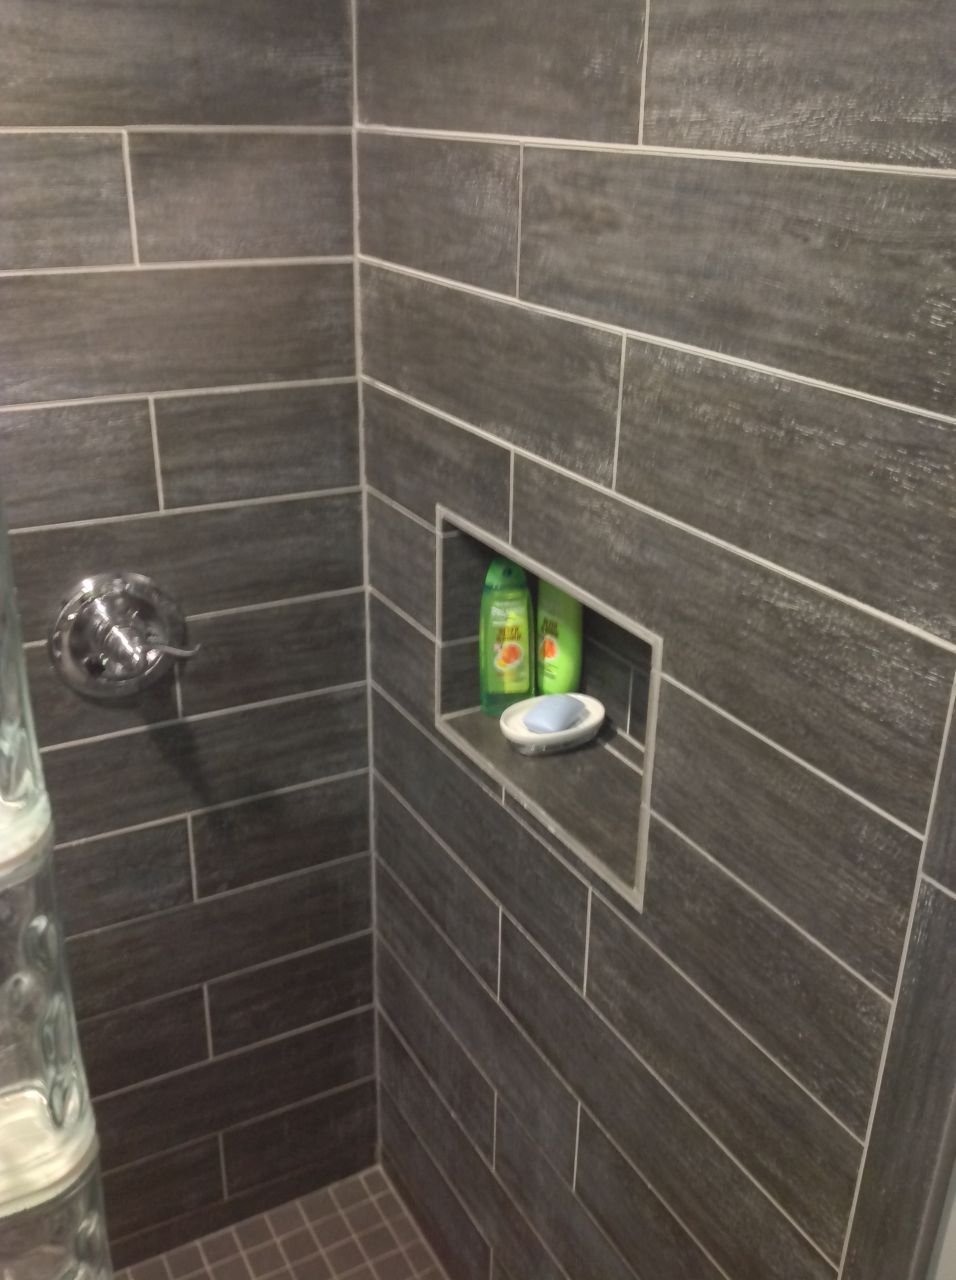 I Hate Grout Joints in the Shower - Winning the Battle vs ...